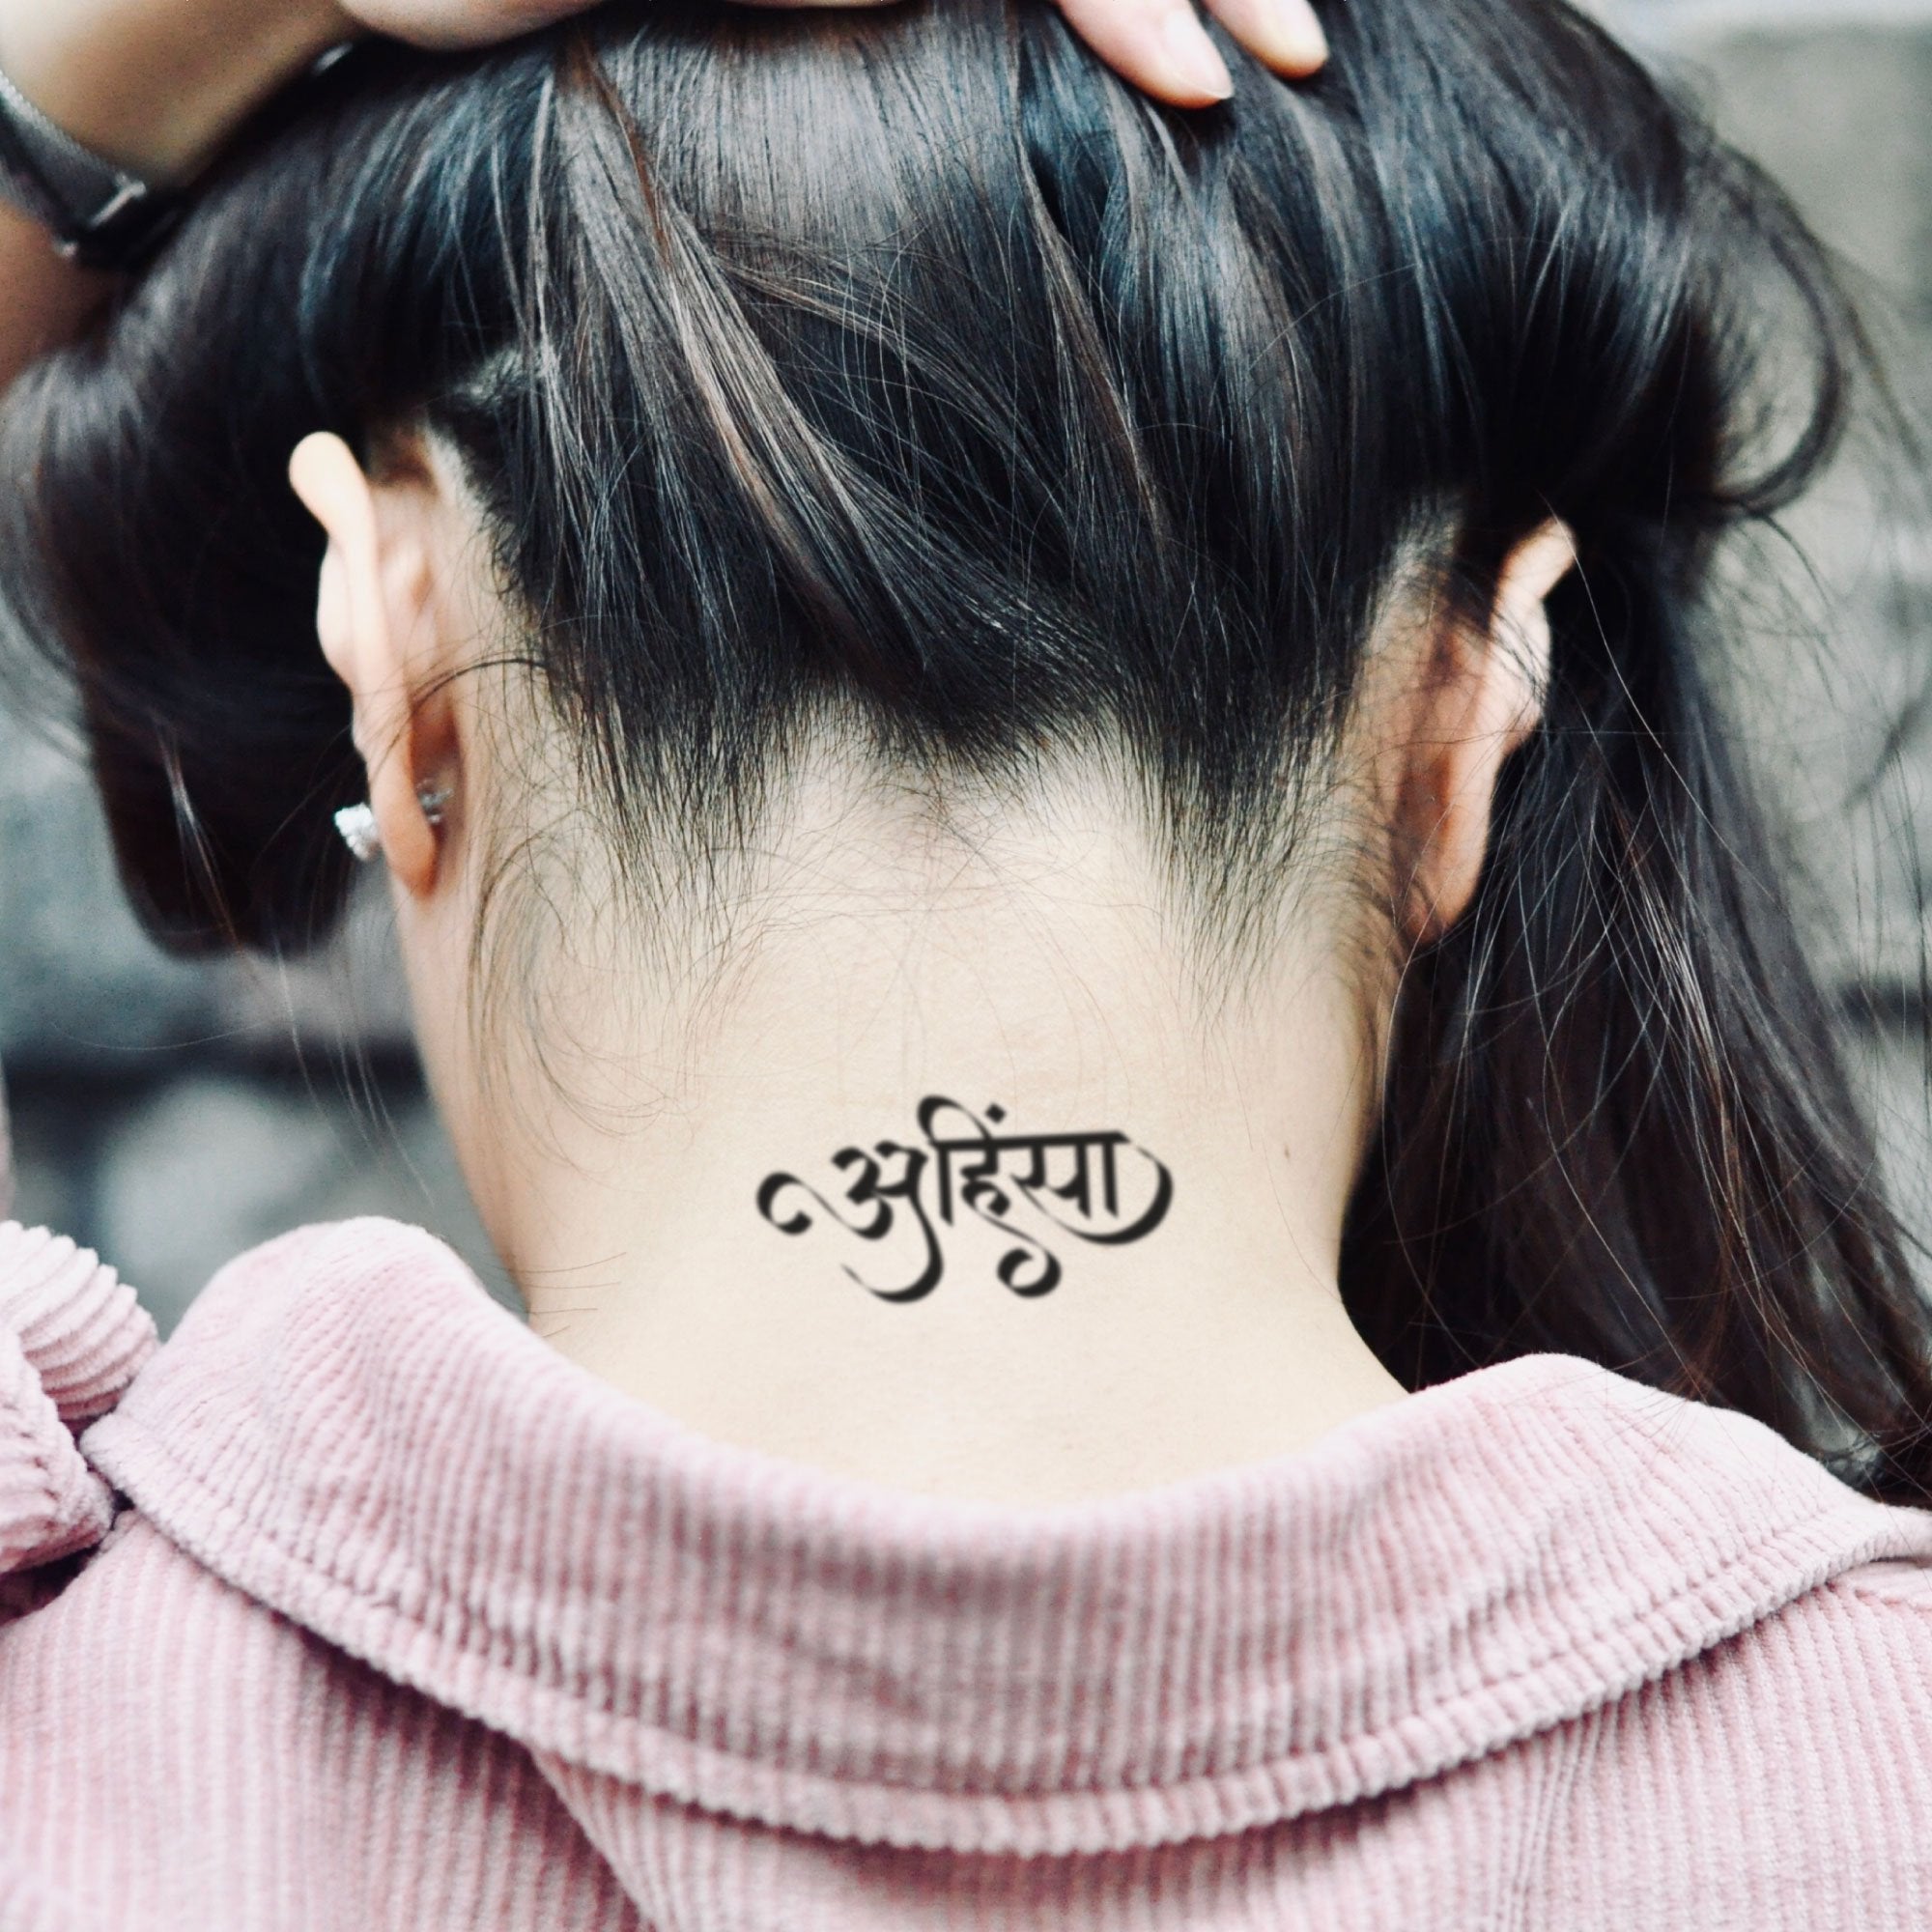 Brahma's Ink Tattoo - Breathe This ancient Sanskrit symbol is a beautiful  reminder to do what comes naturally. It's the first thing we do when we  come in to this world, and